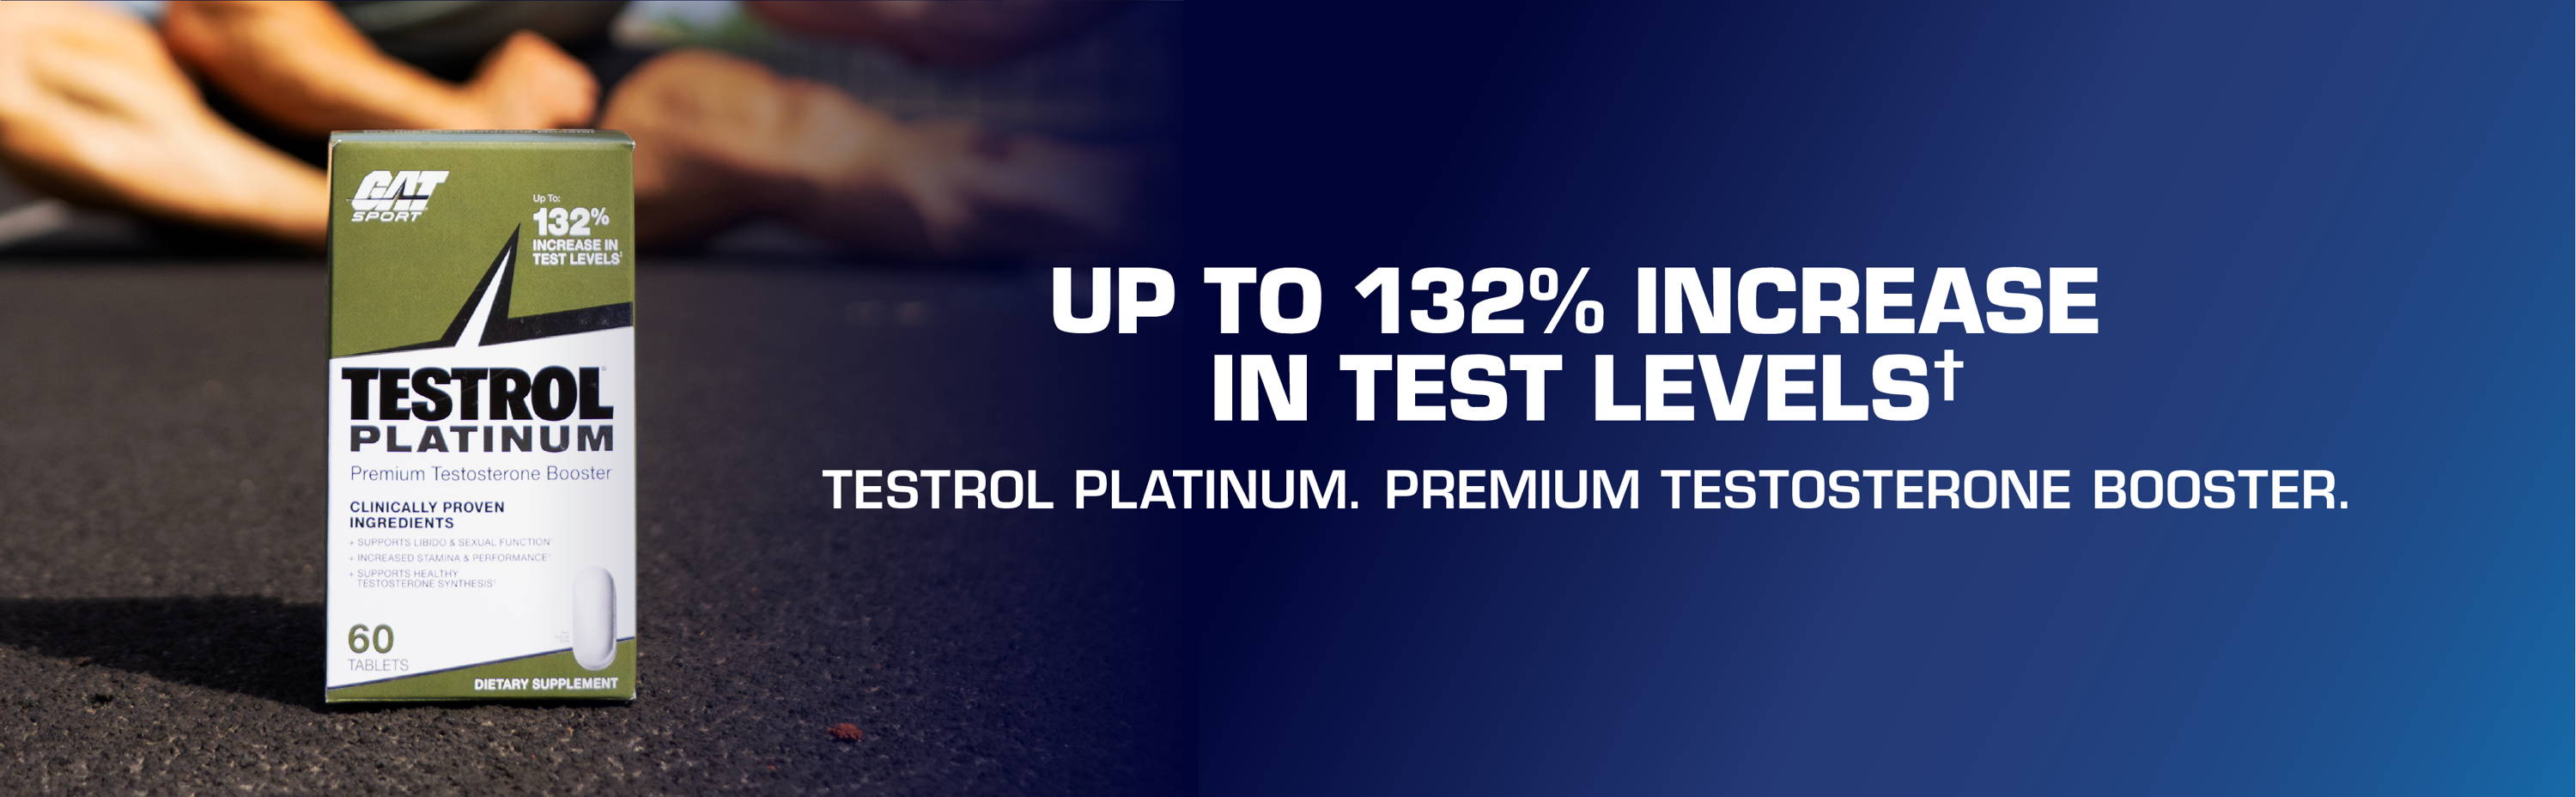 up to 132% increase in test levels*